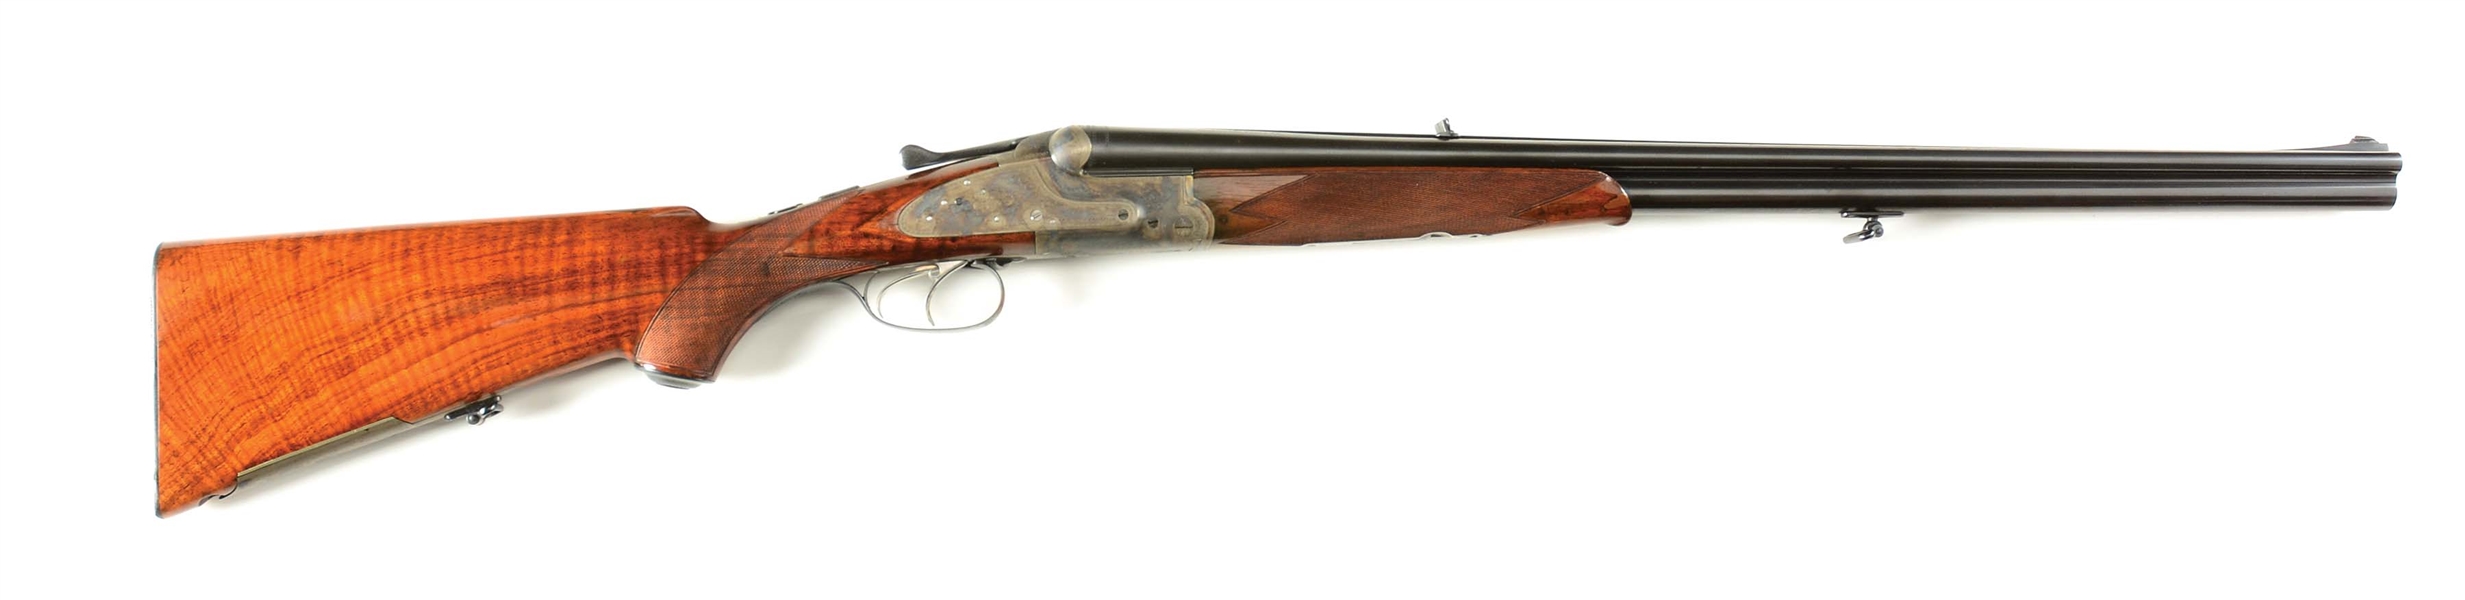 (C) J.P. SAUER & SOHN SIDELOCK DOUBLE RIFLE DRILLING MADE FOR D. S. SPAULDING, SUCR, MEXICO.